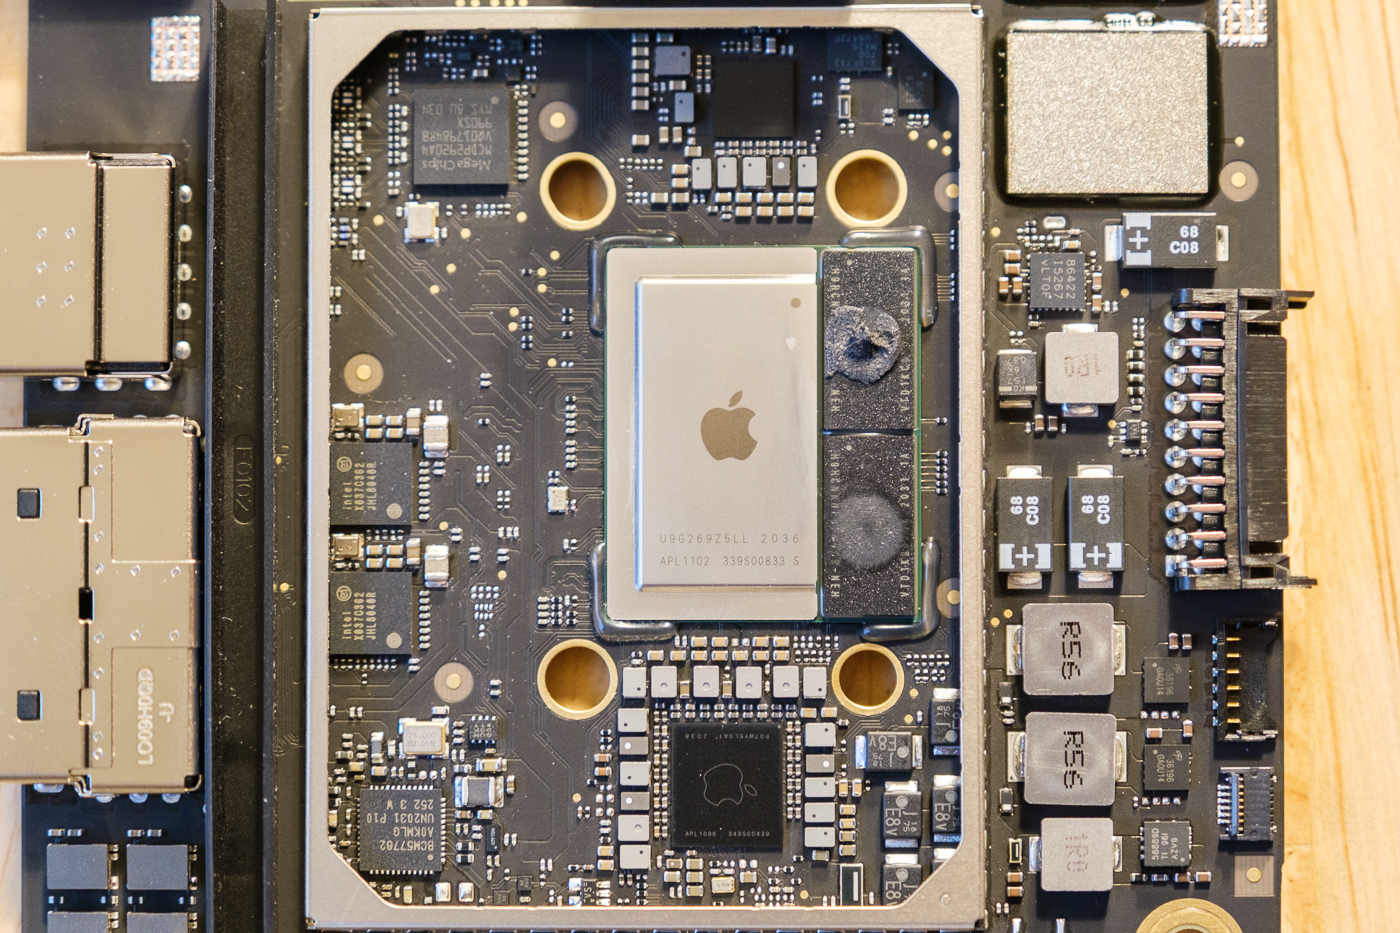 M1 Mac mini can be hacked to take power over PoE